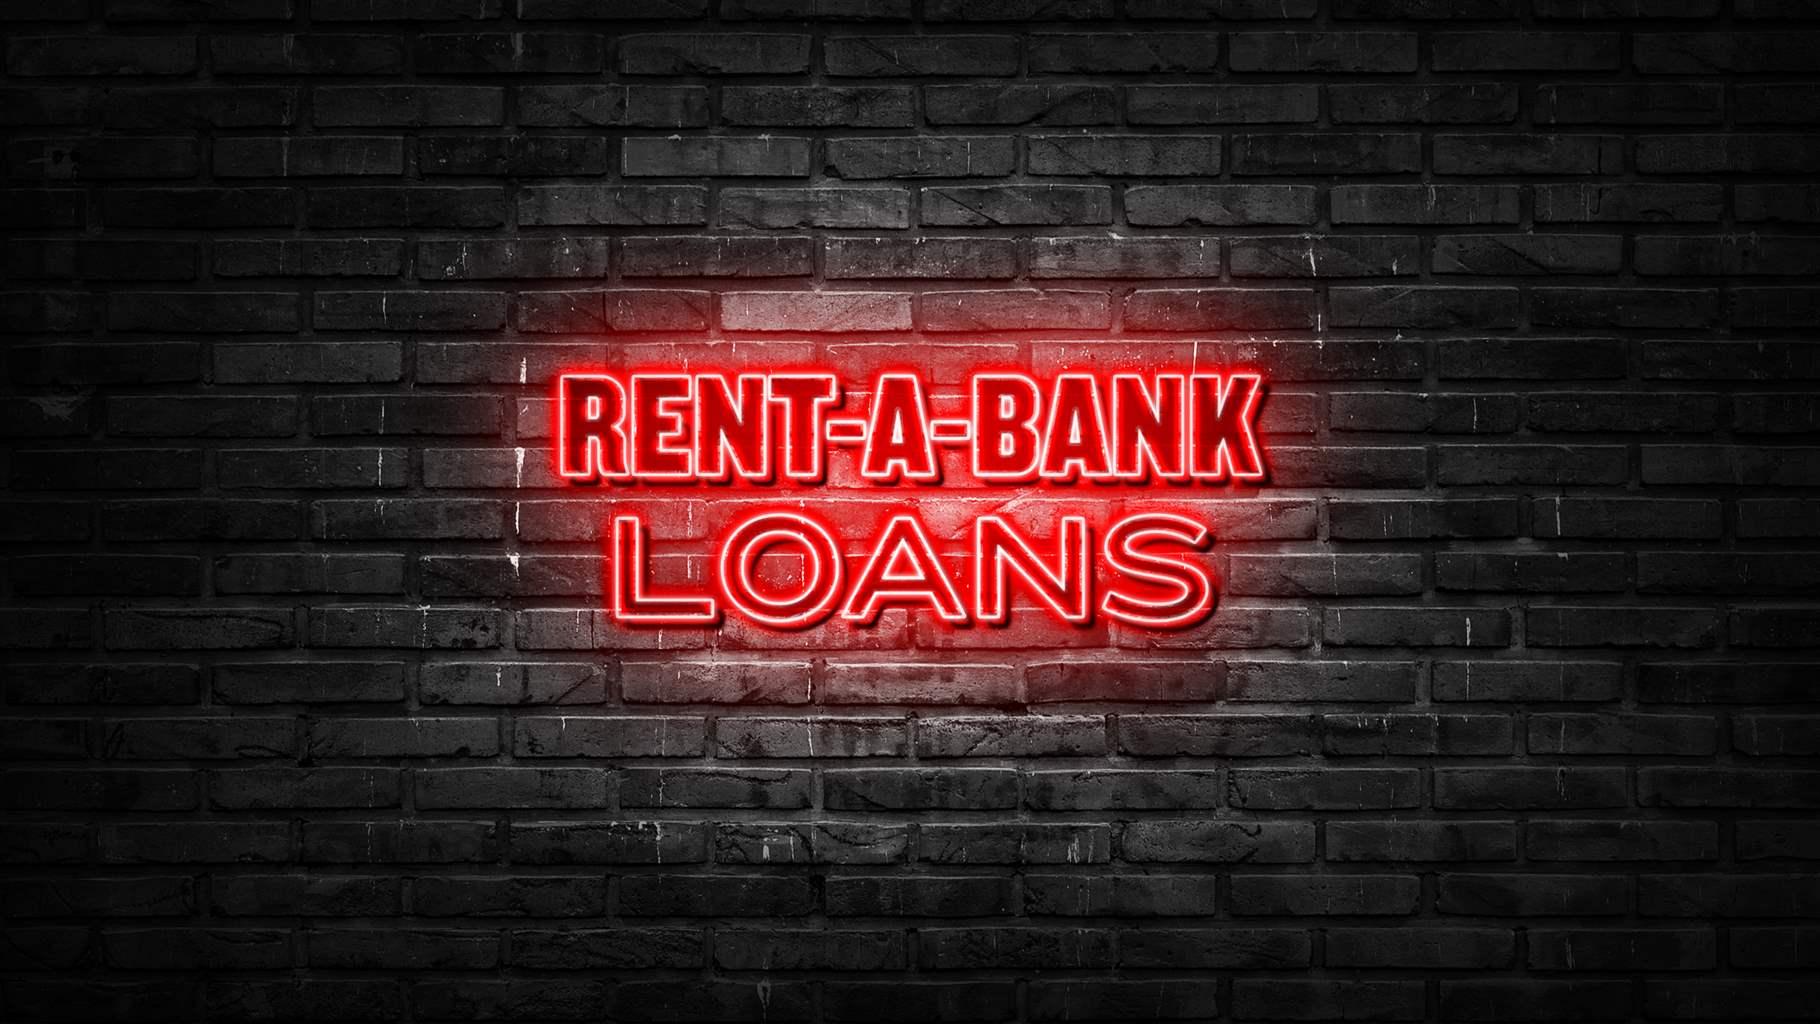 A neon red sign hung on a brick wall that says "rent-a-bank loans" 